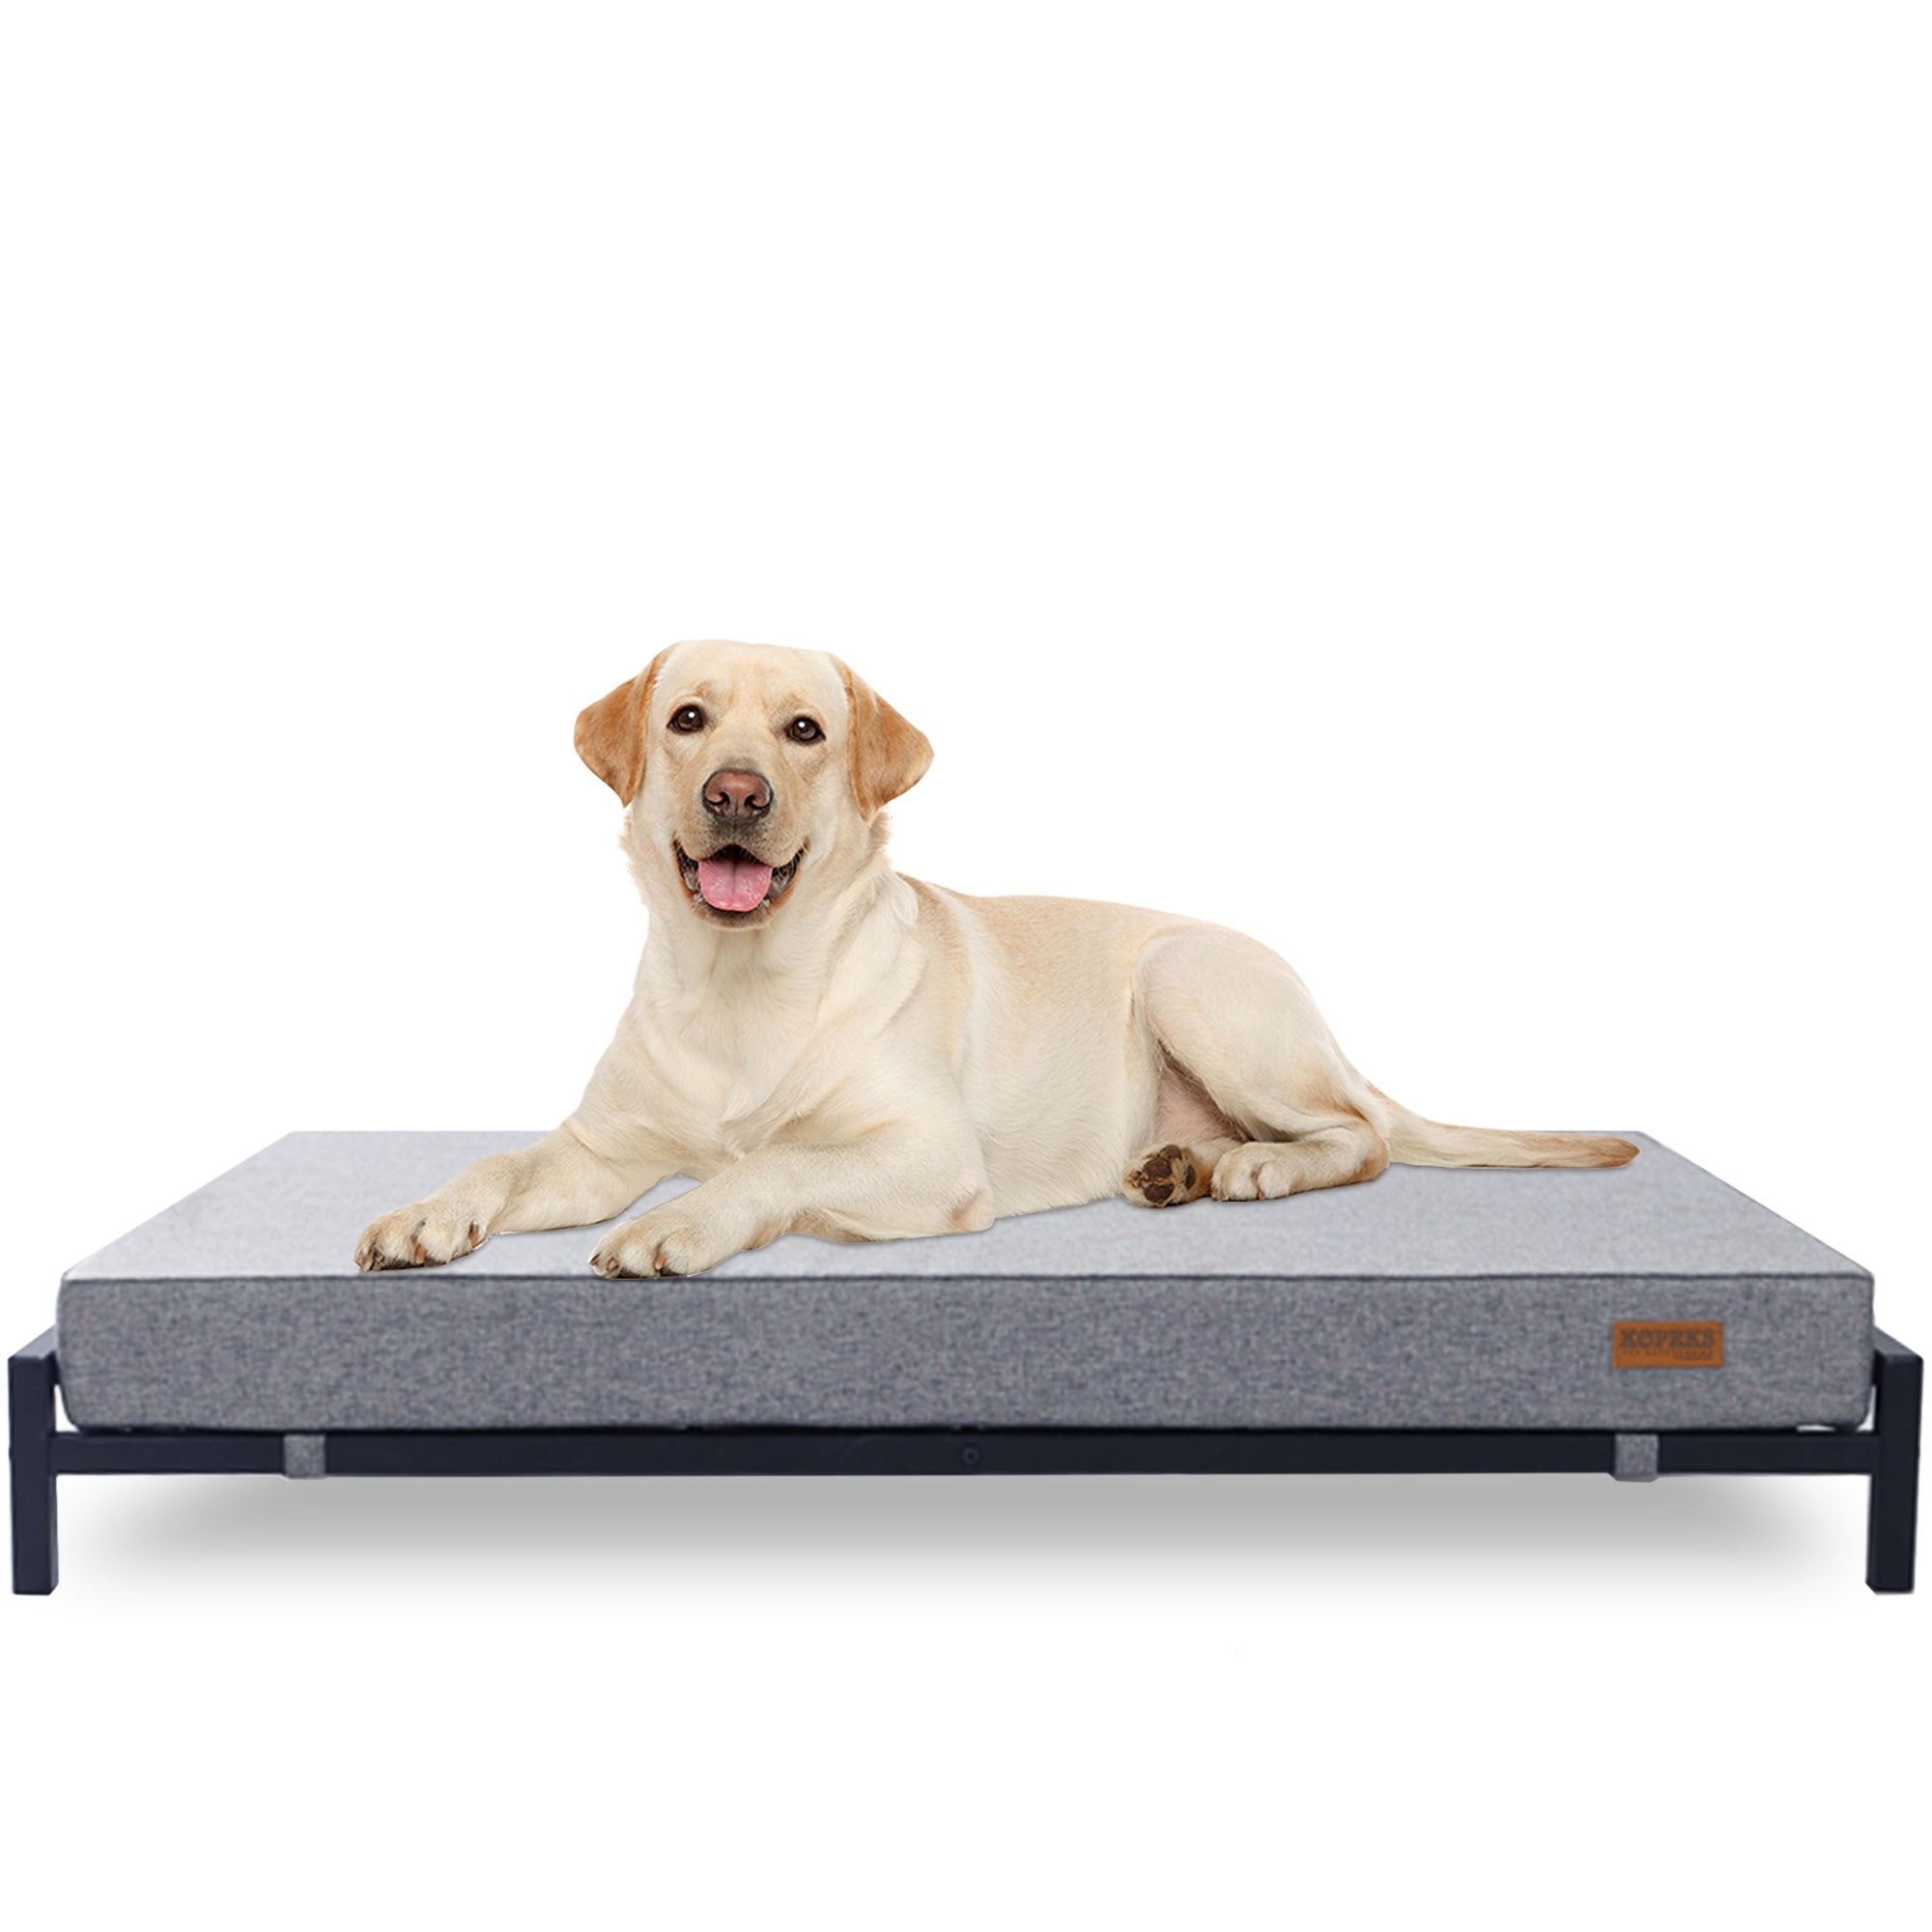 Elevated Dog Bed with Orthopedic Foam Mattress - Modern Style - For Large Dogs